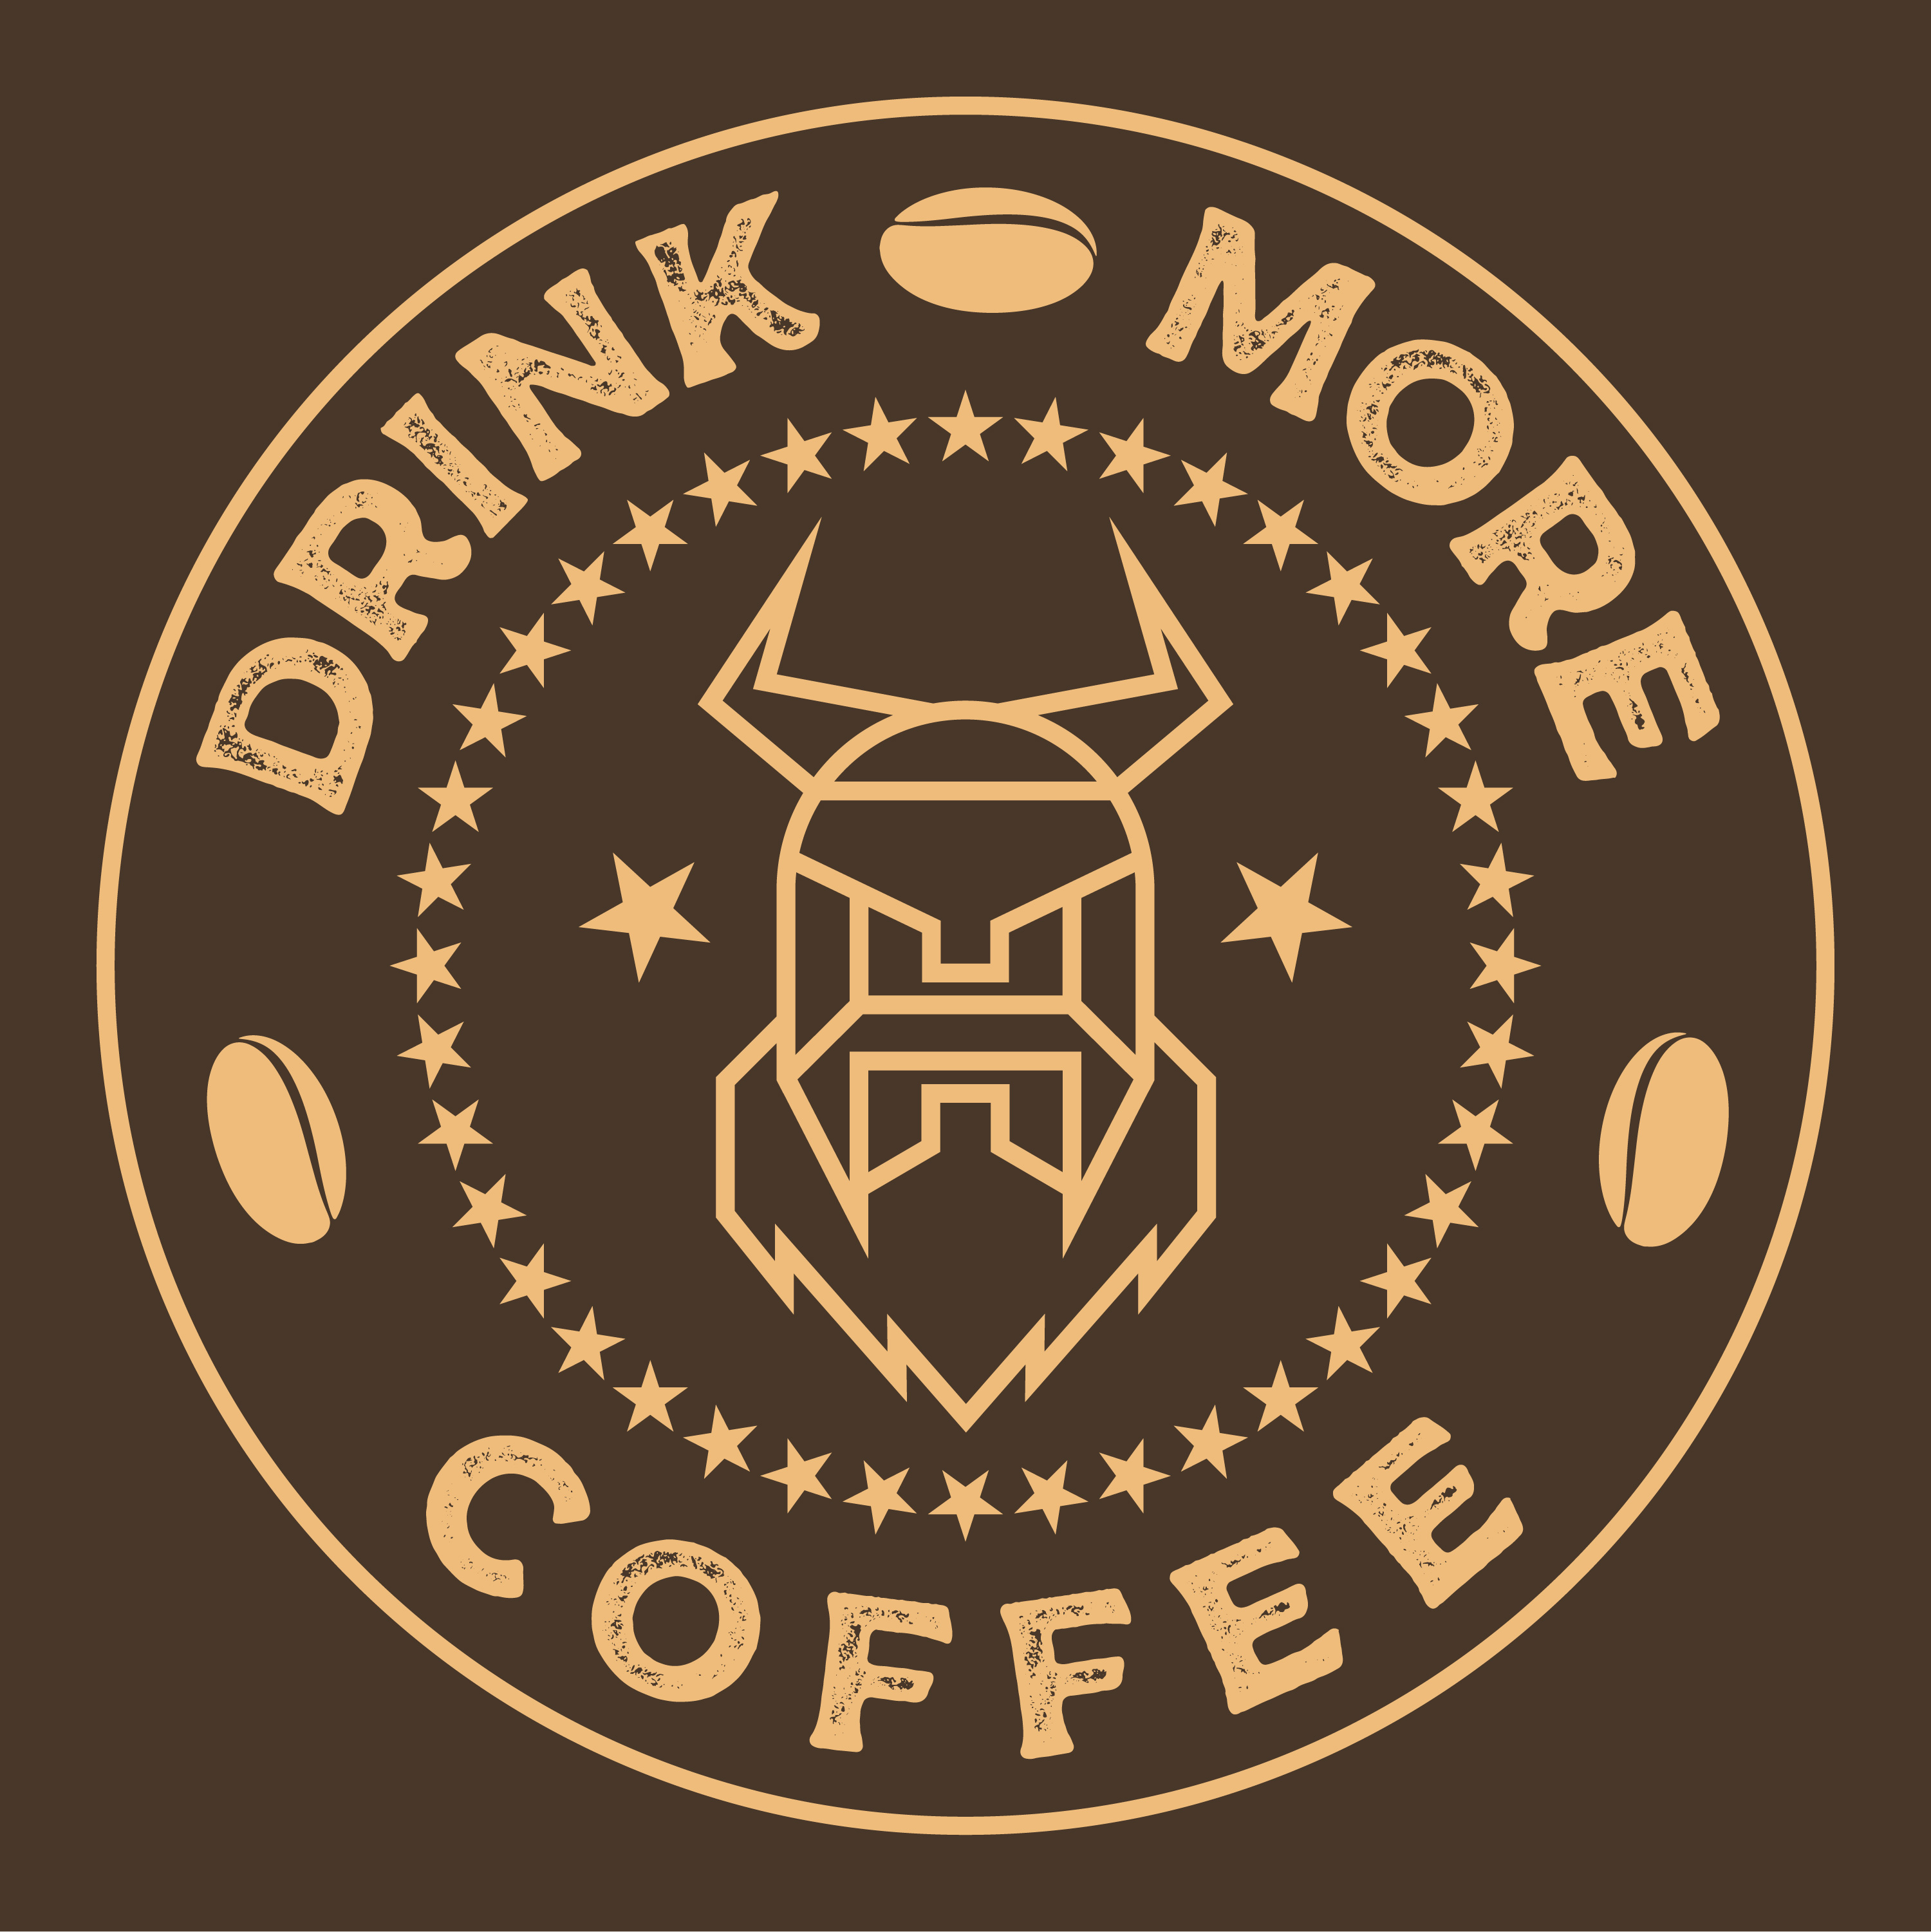 Drink More Coffee